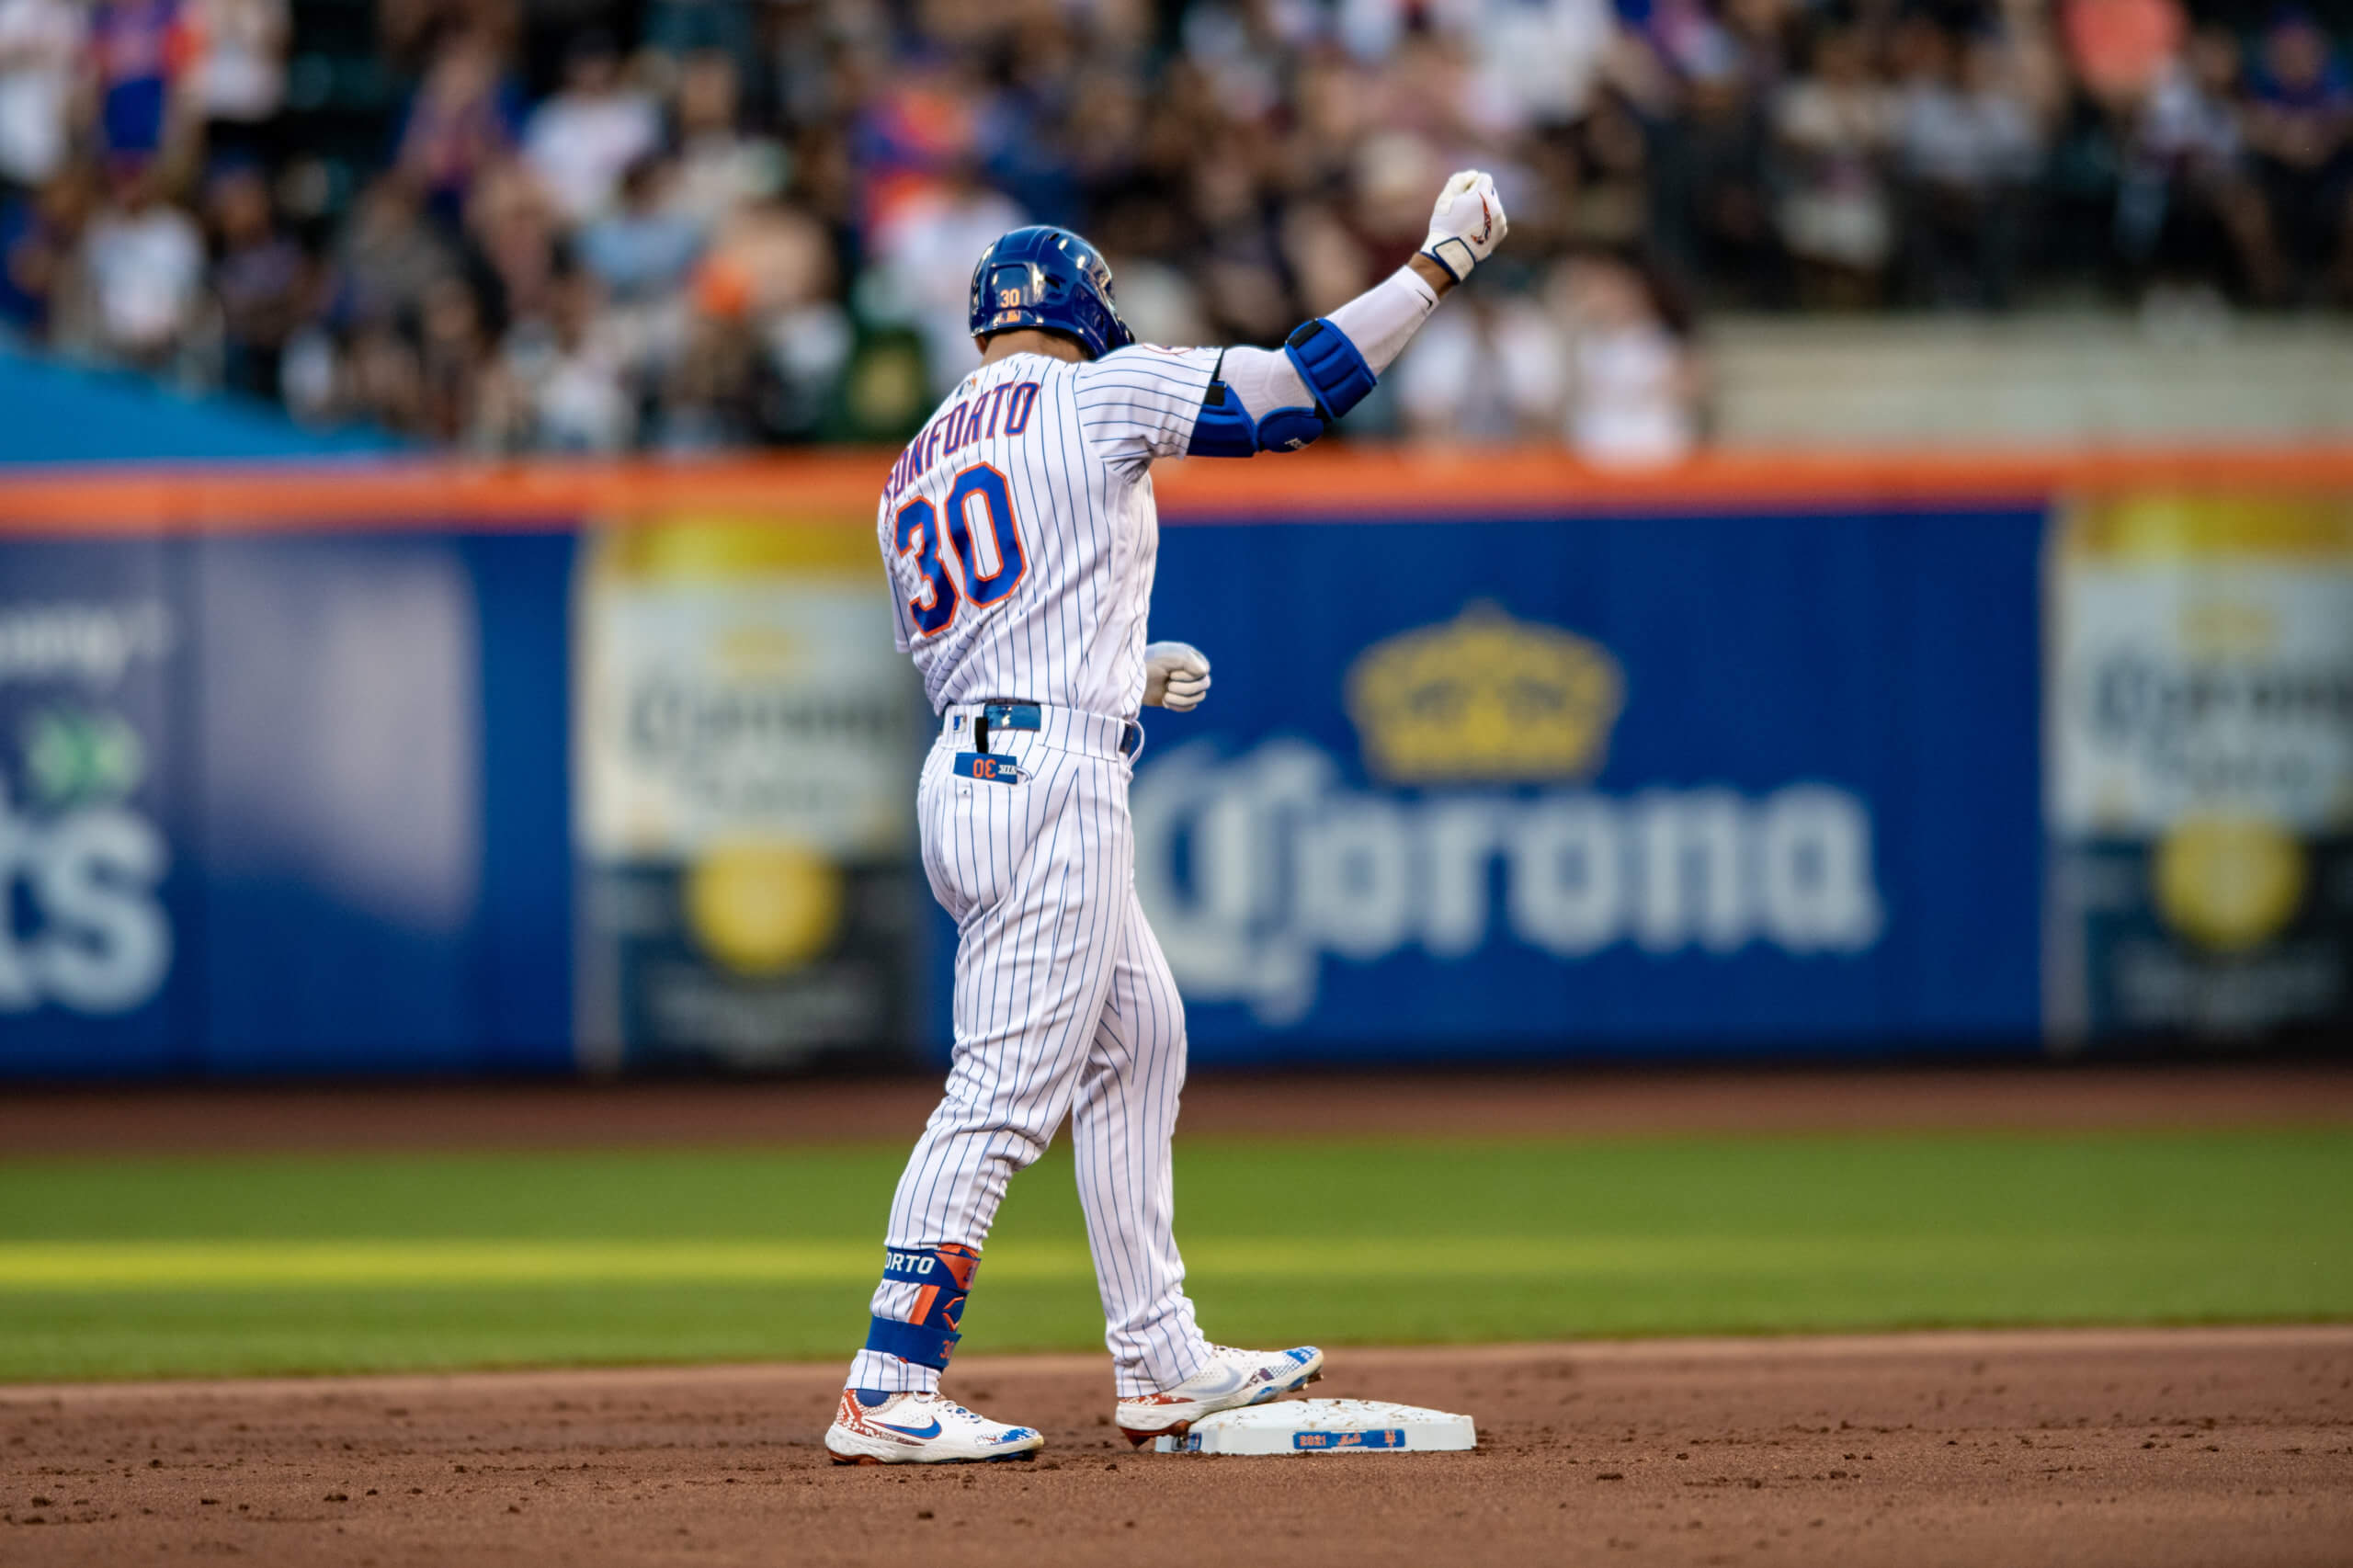 Michael Conforto makes return to Citi Field with the Giants